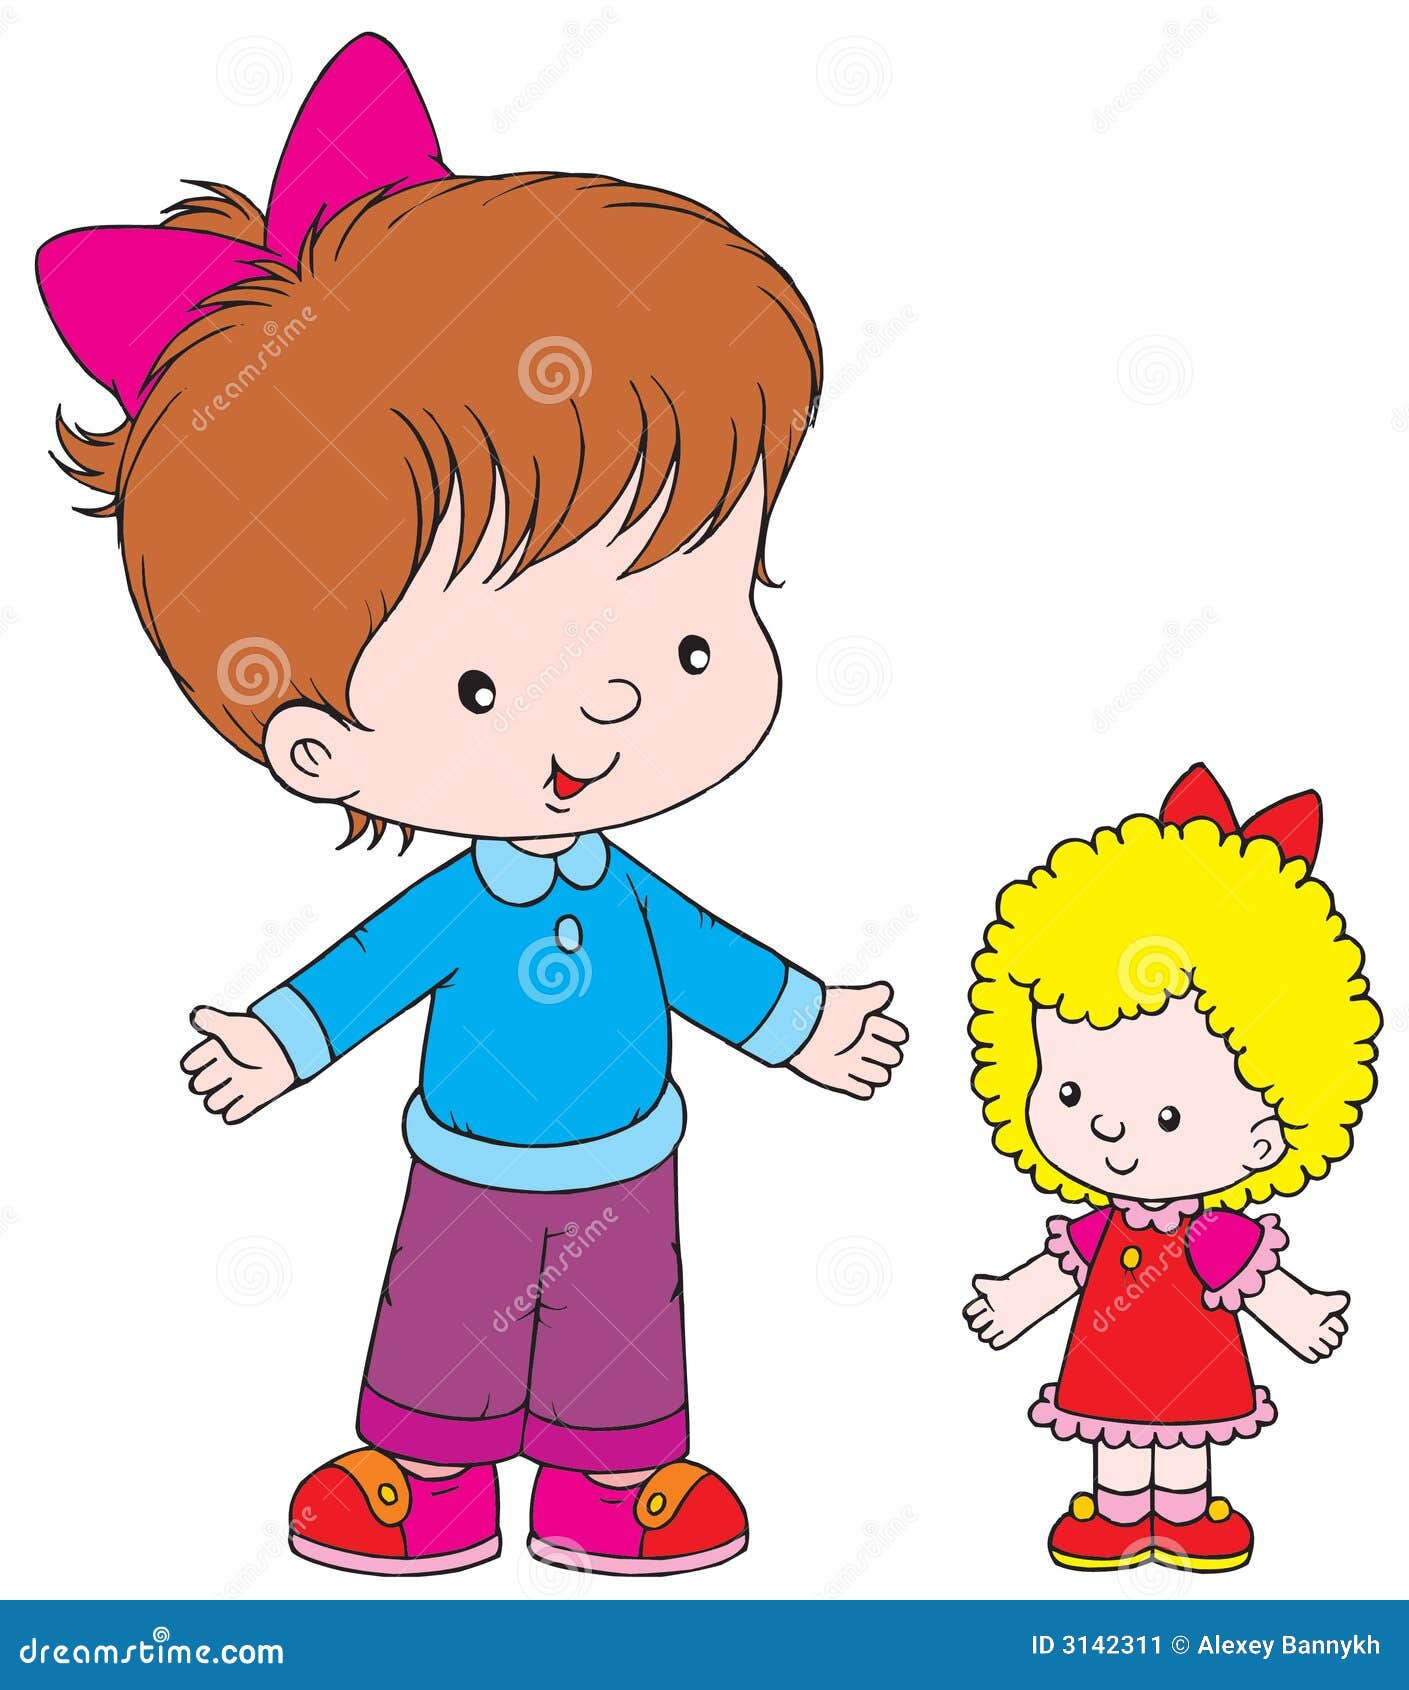 clipart of baby dolls - photo #49